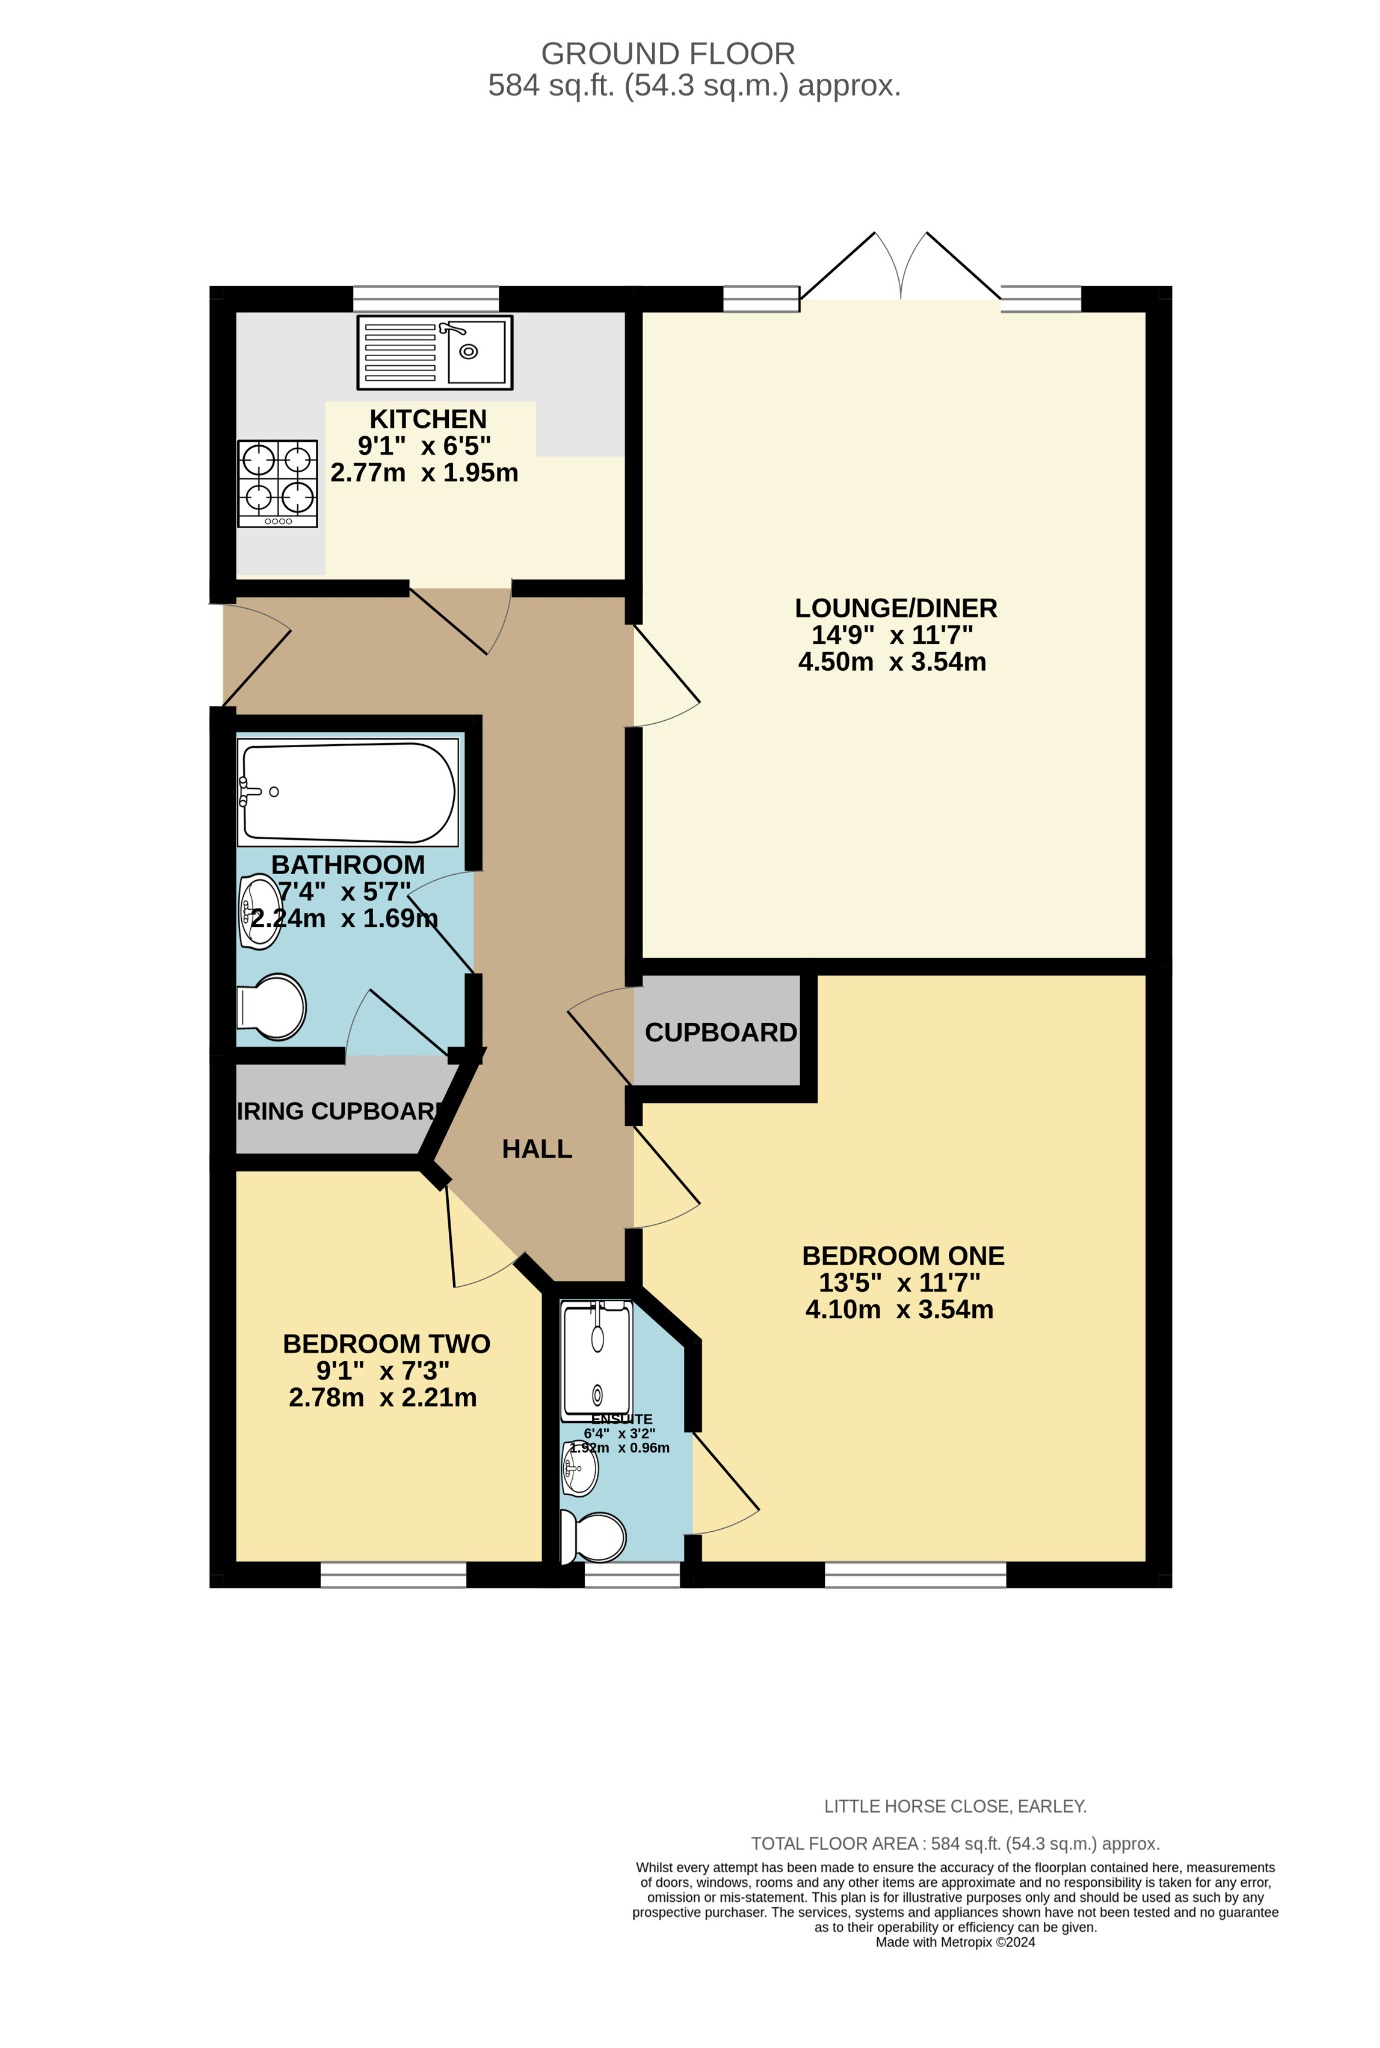 2 bed flat for sale in Little Horse Close, Reading - Property floorplan